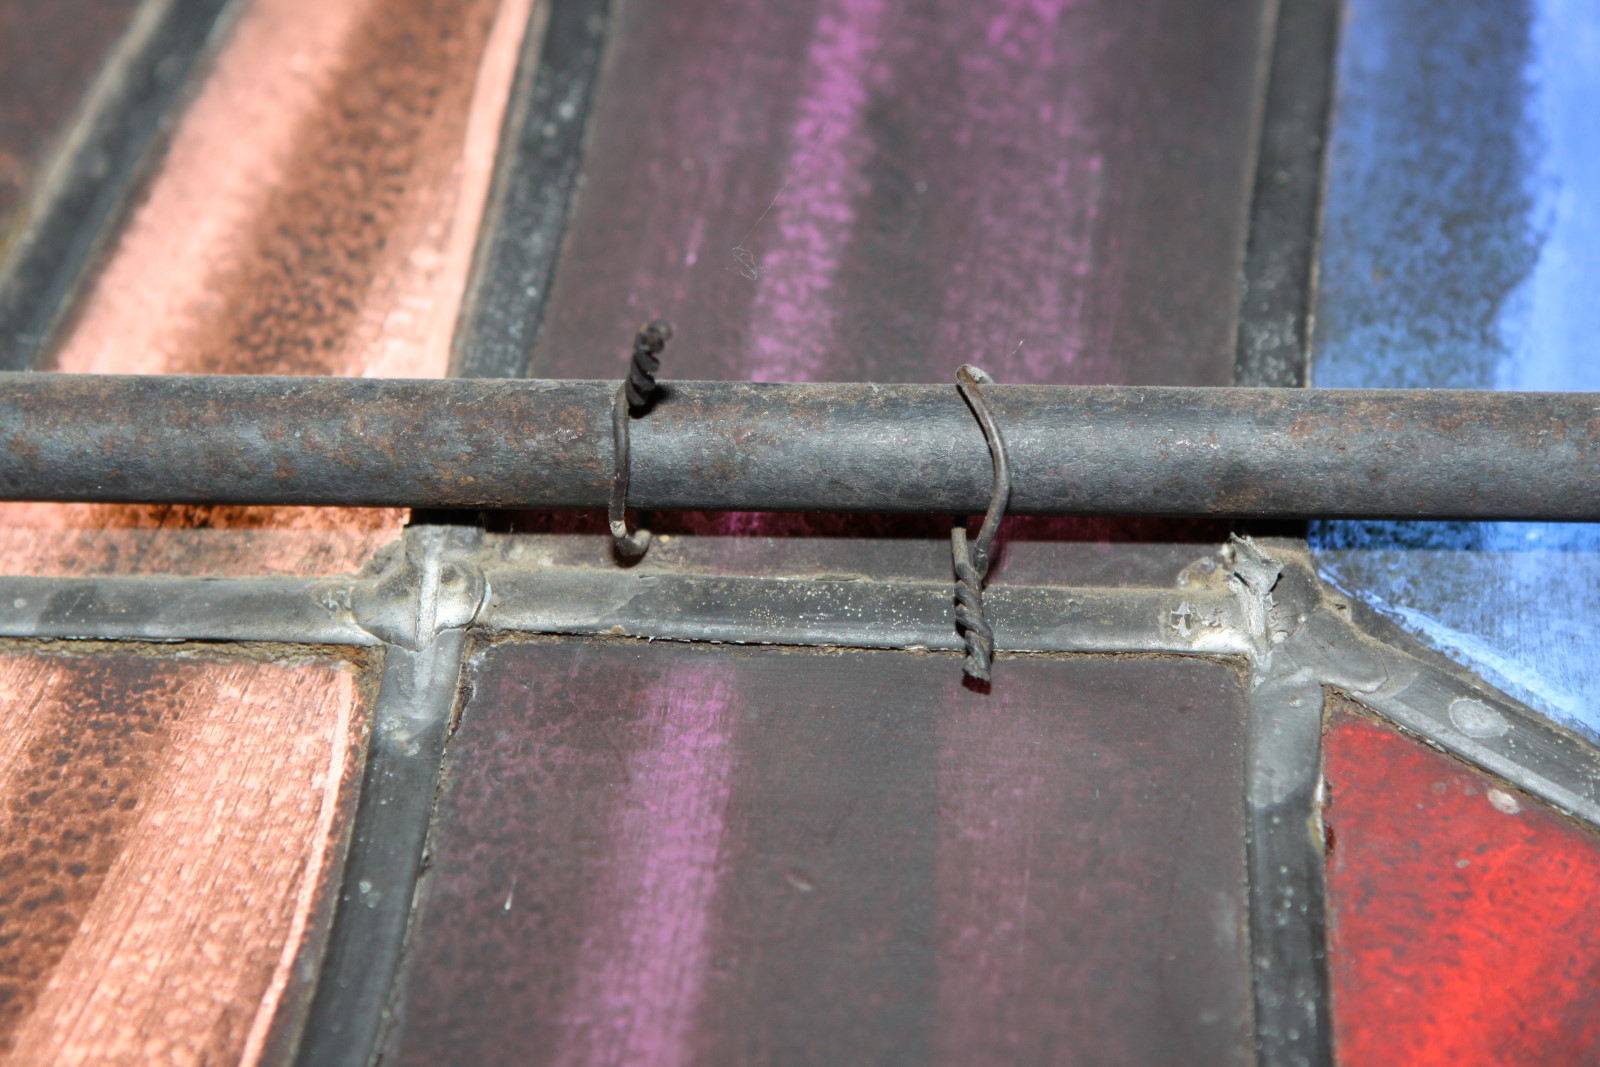 Loose copper ties on round stanchion bar